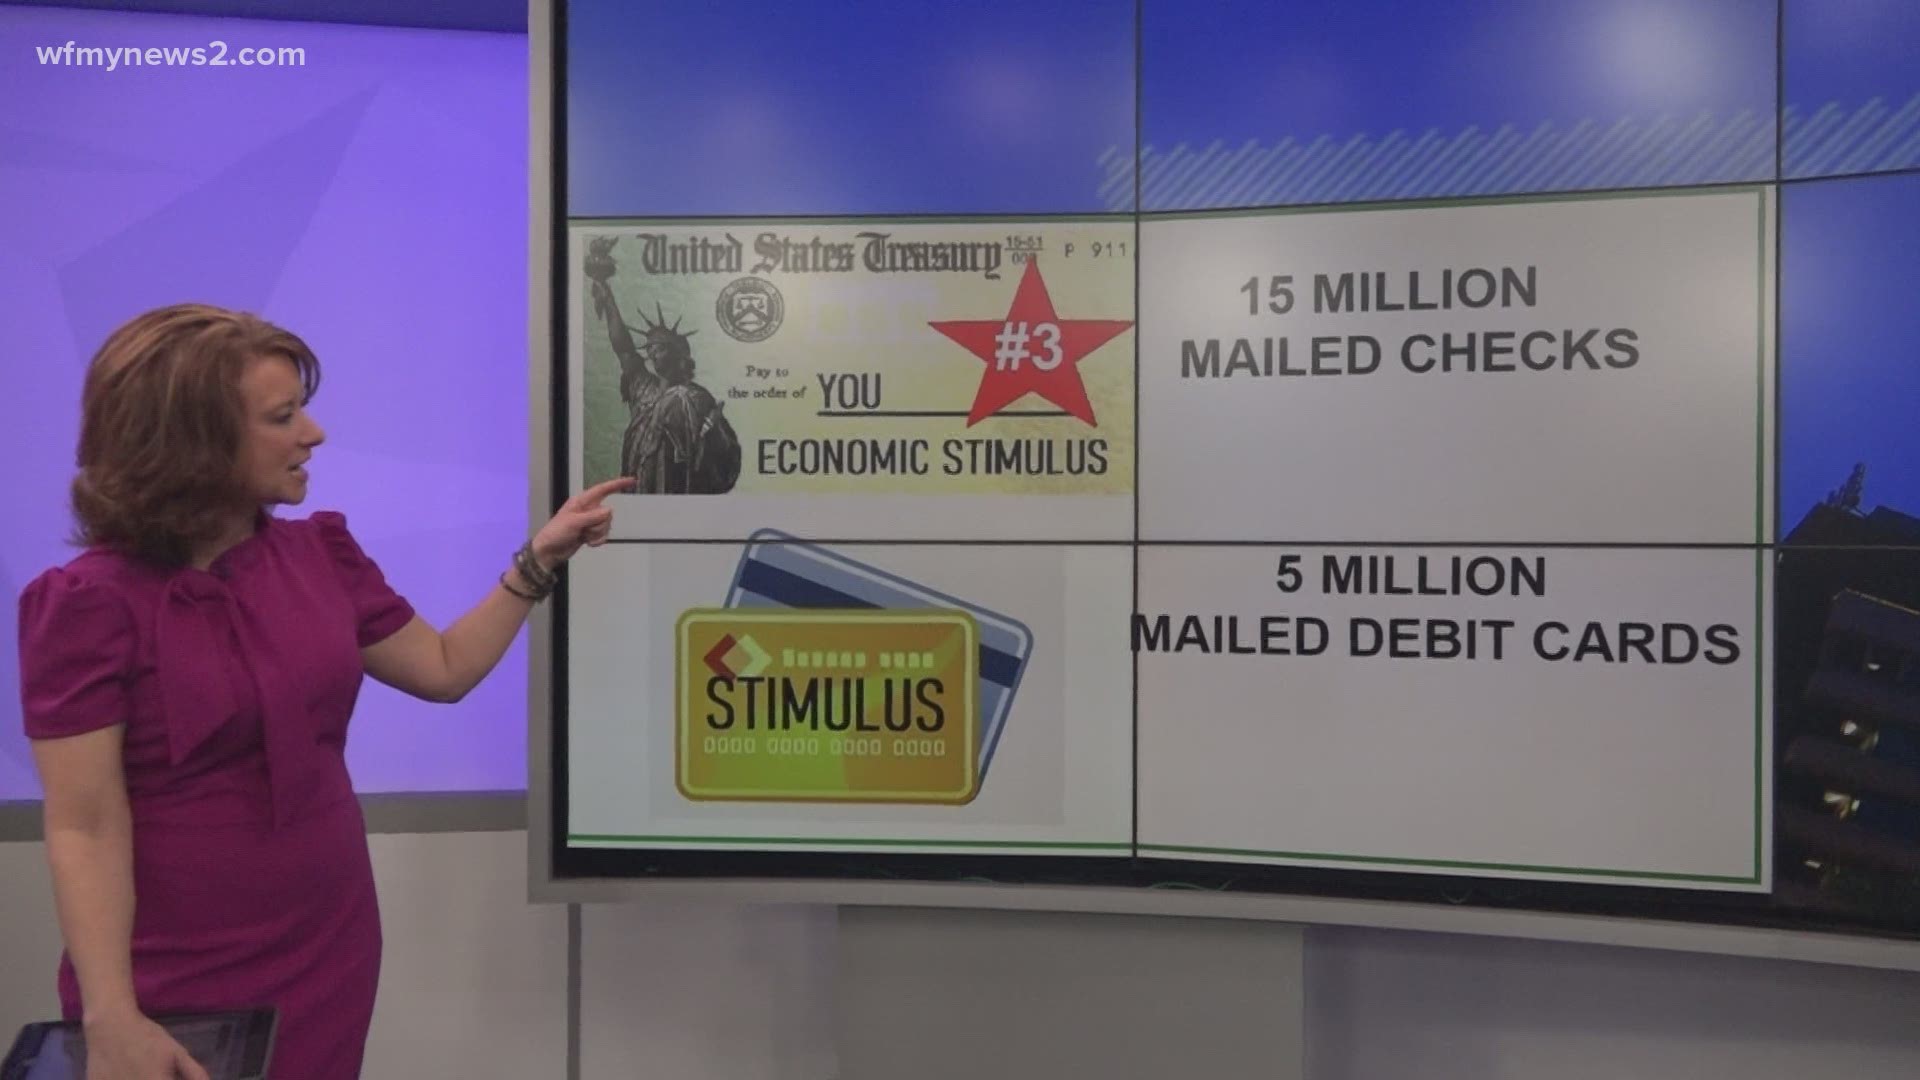 The IRS is in the process of sending out 15 million checks and 5 million debit cards for the second round of third stimulus payments.